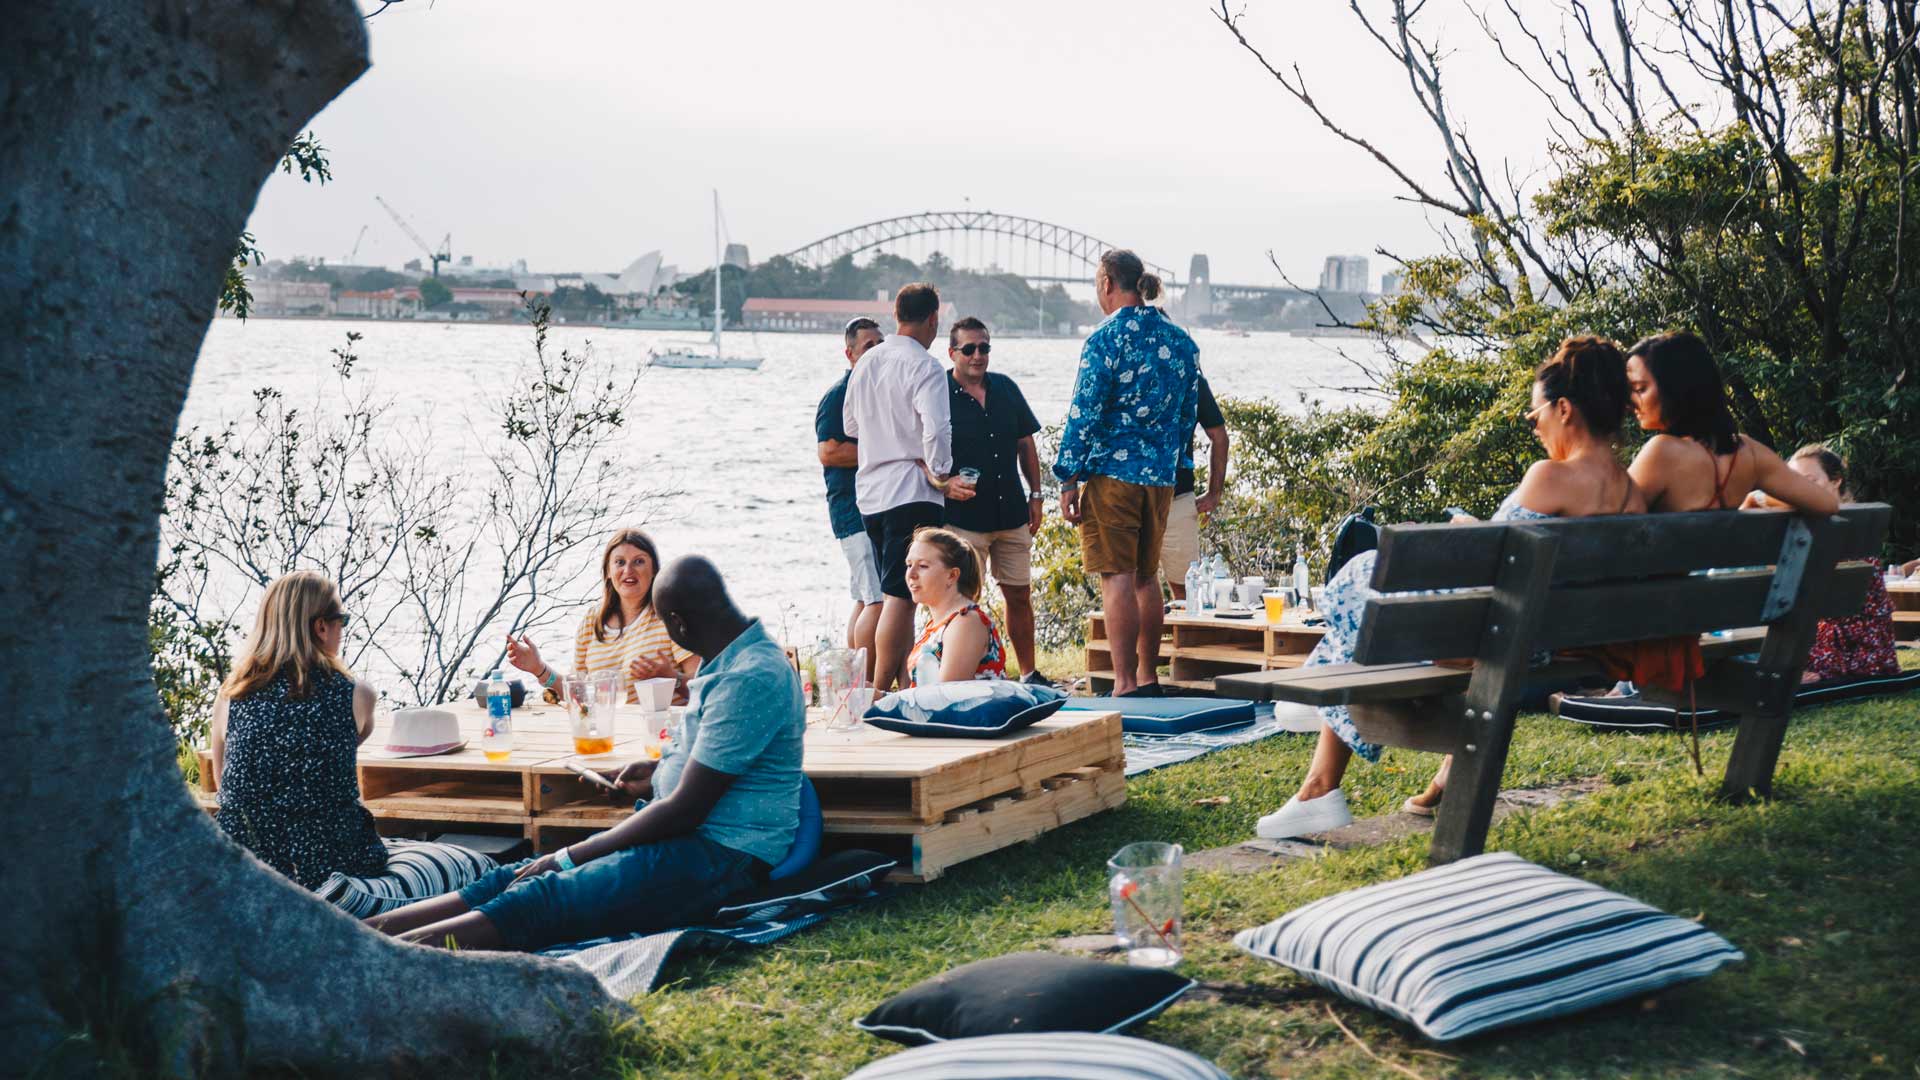 Wine Island Is Bringing Its Three-Day Vino-Tasting Party Back to Sydney Harbour in 2022